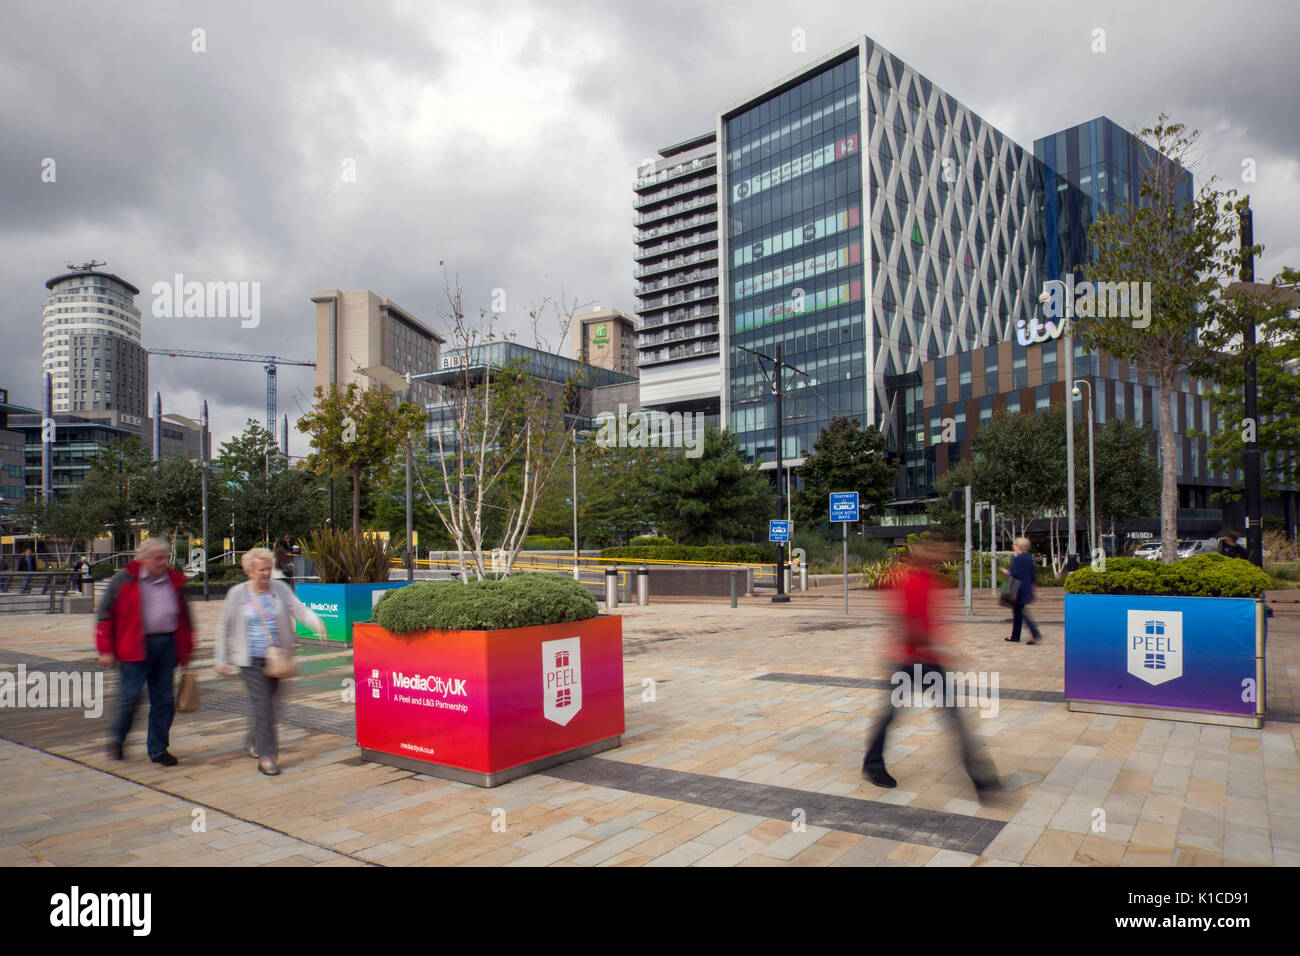 MediaCityUK is a 200-acre busy commercial mixed-use property development on the banks of the Manchester Ship Canal in Salford Quays and Trafford, Greater Manchester, England. UK Stock Photo